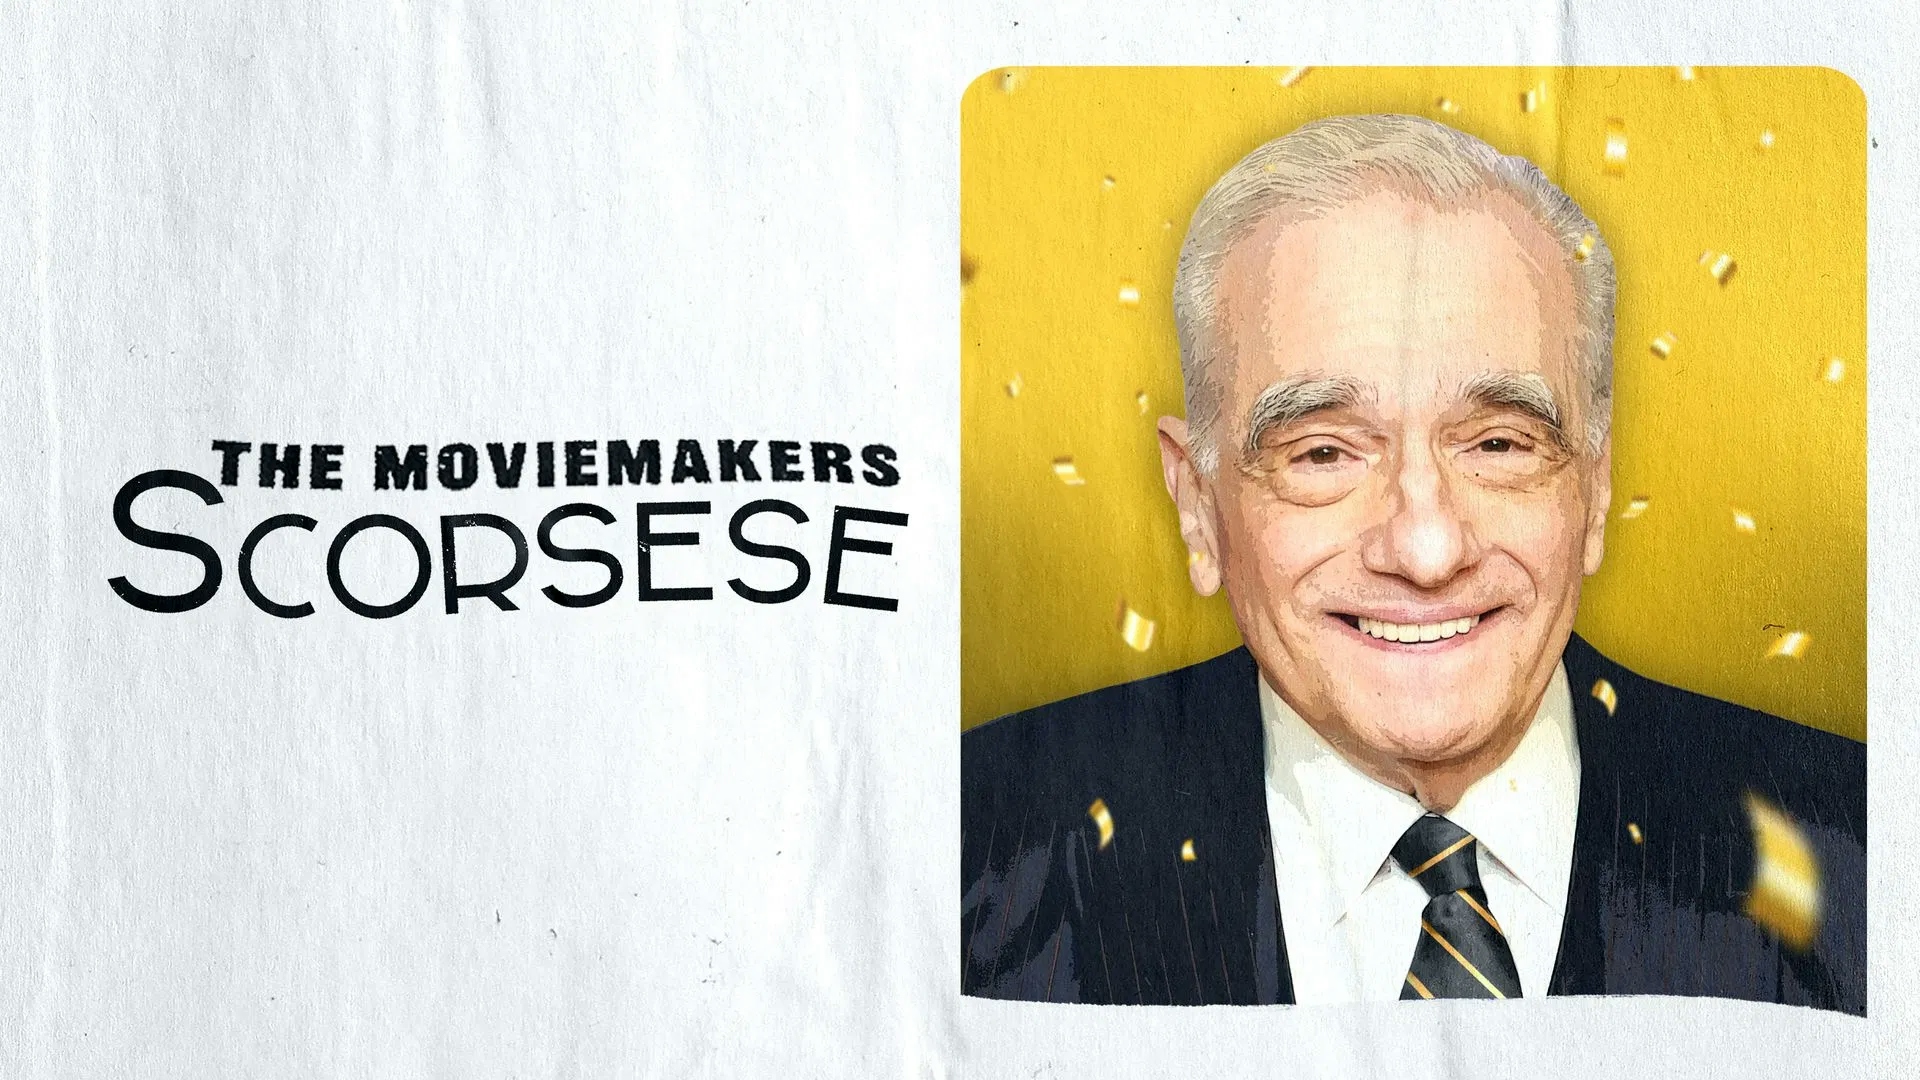 The Moviemakers: Scorsese